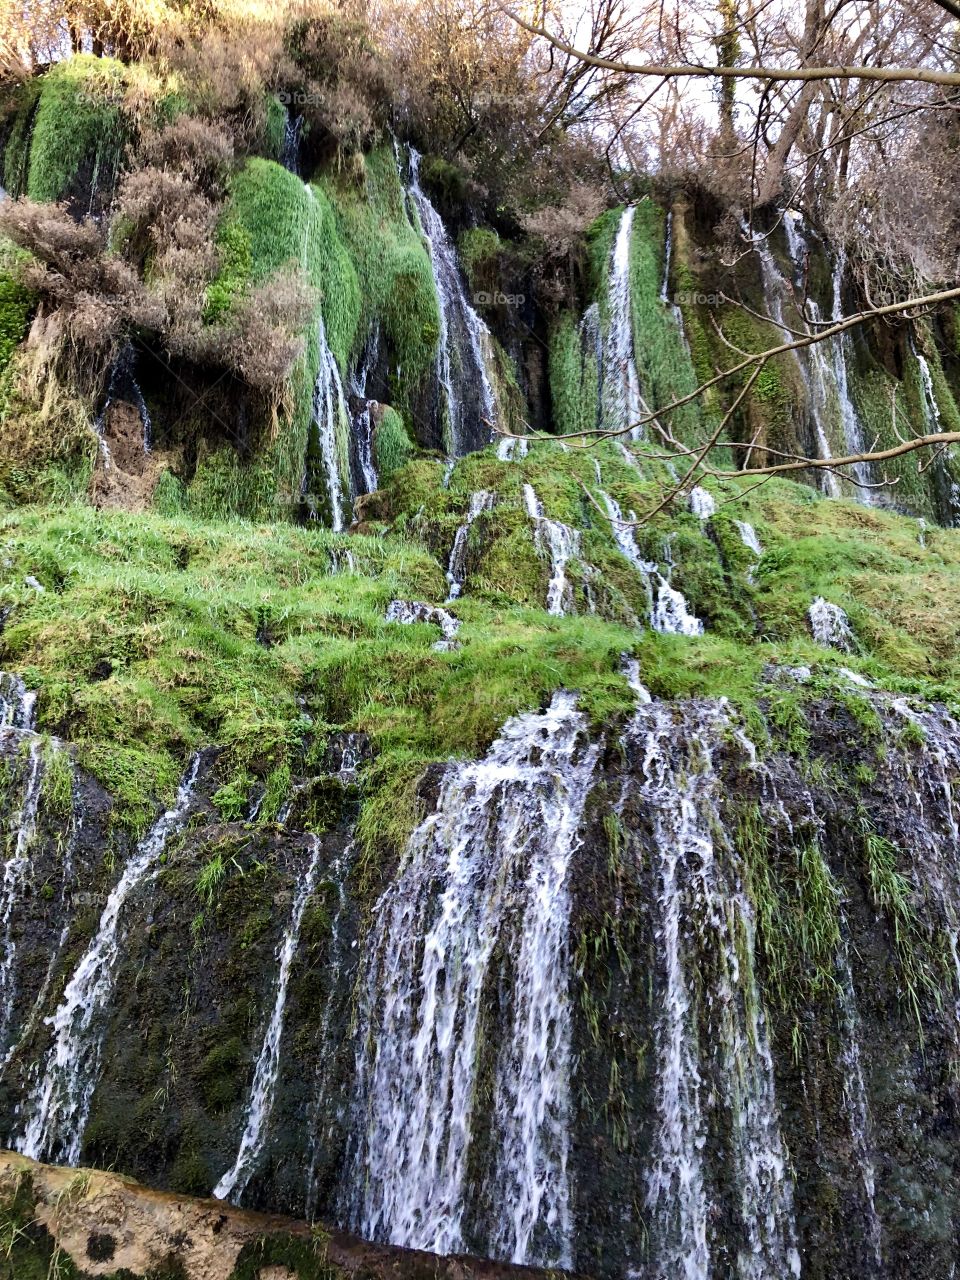 A beautiful, lush green hillside waterfalls. Water bursting from every opening makes this almost a Dreamscape. 